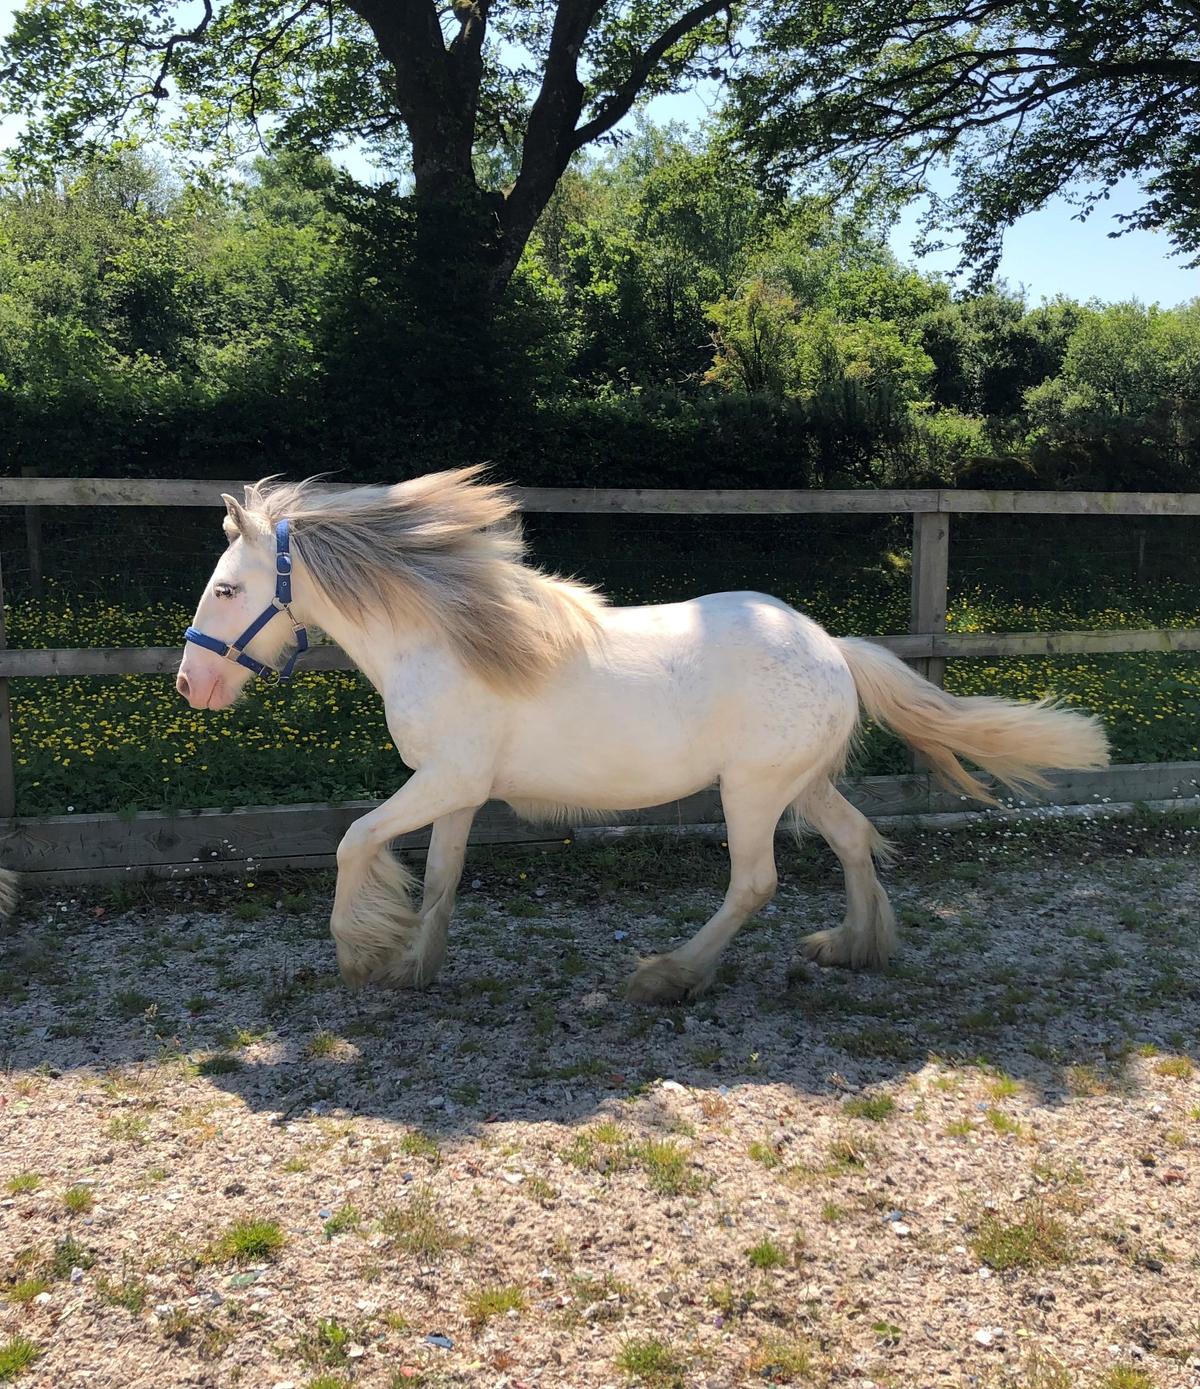 A recent photo of Shiraz galloping. (Courtesy of <a href="https://www.mareandfoal.org/">The Mare and Foal Sanctuary</a>)